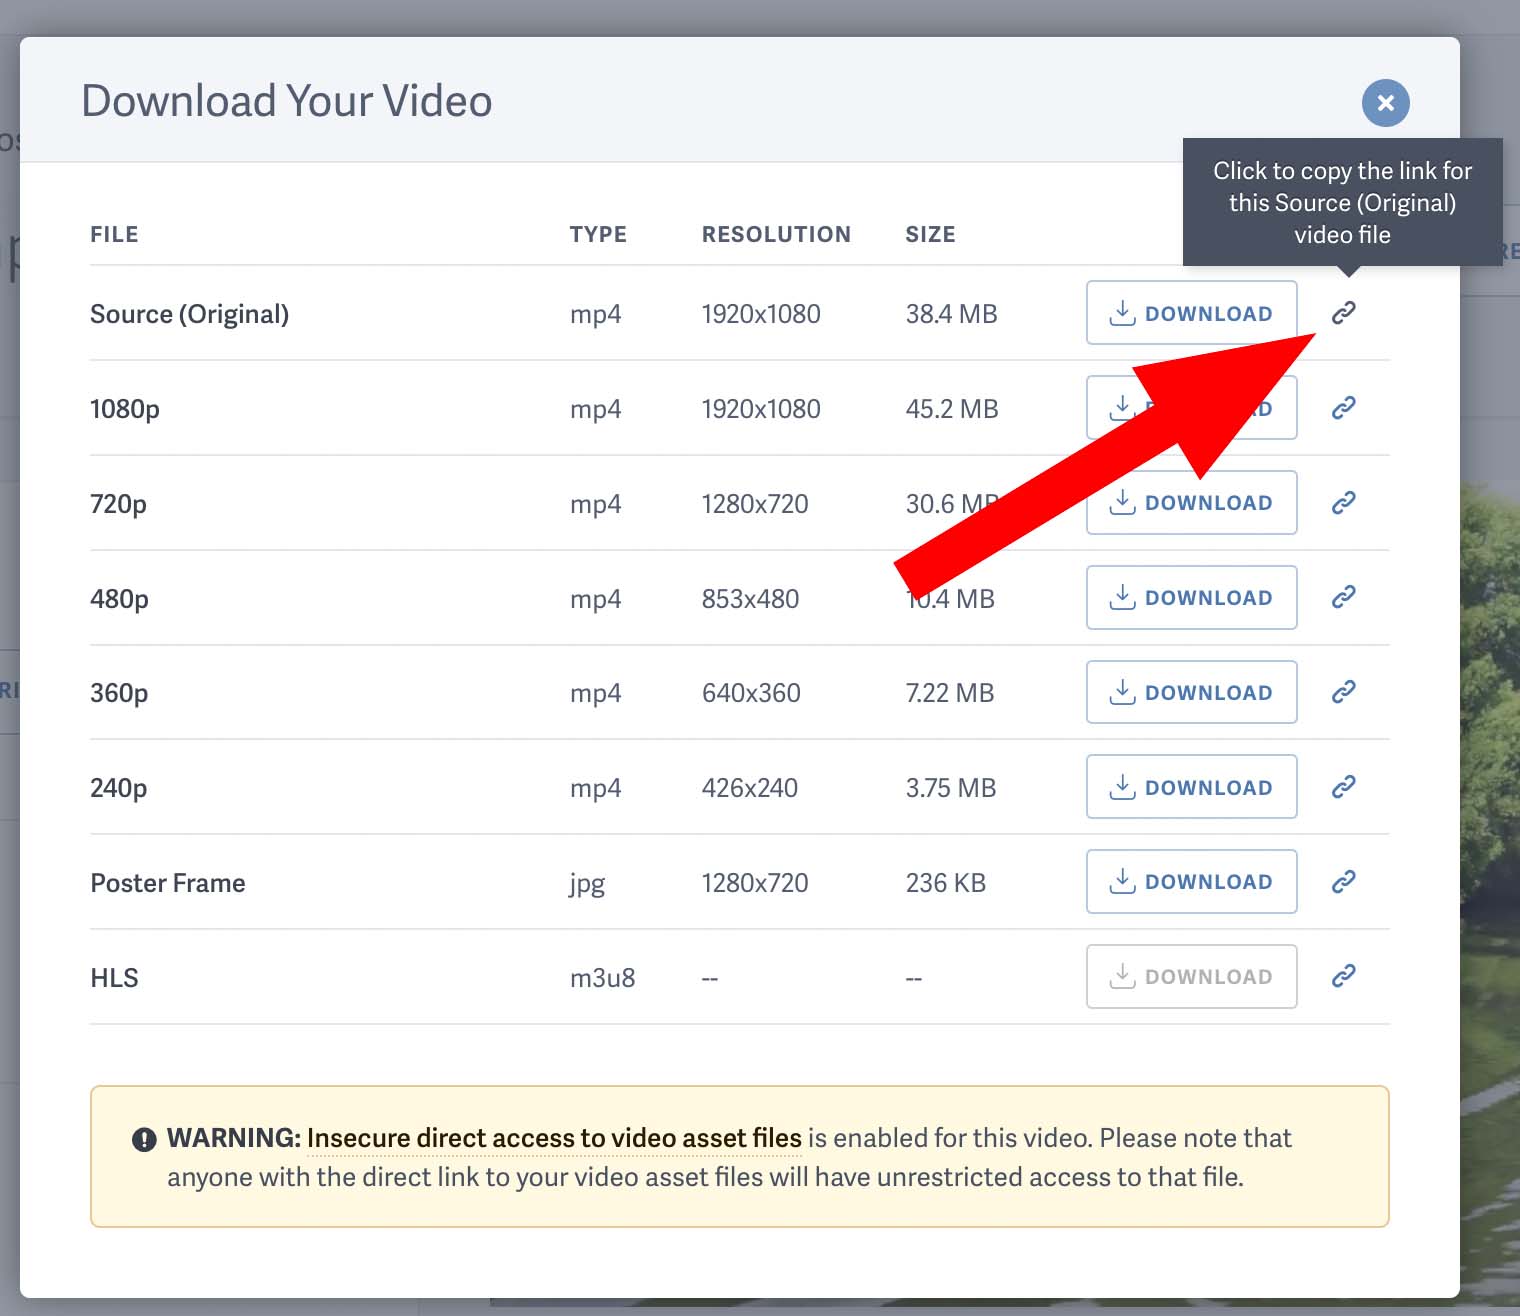 Click to copy the link for any video asset file from the download screen